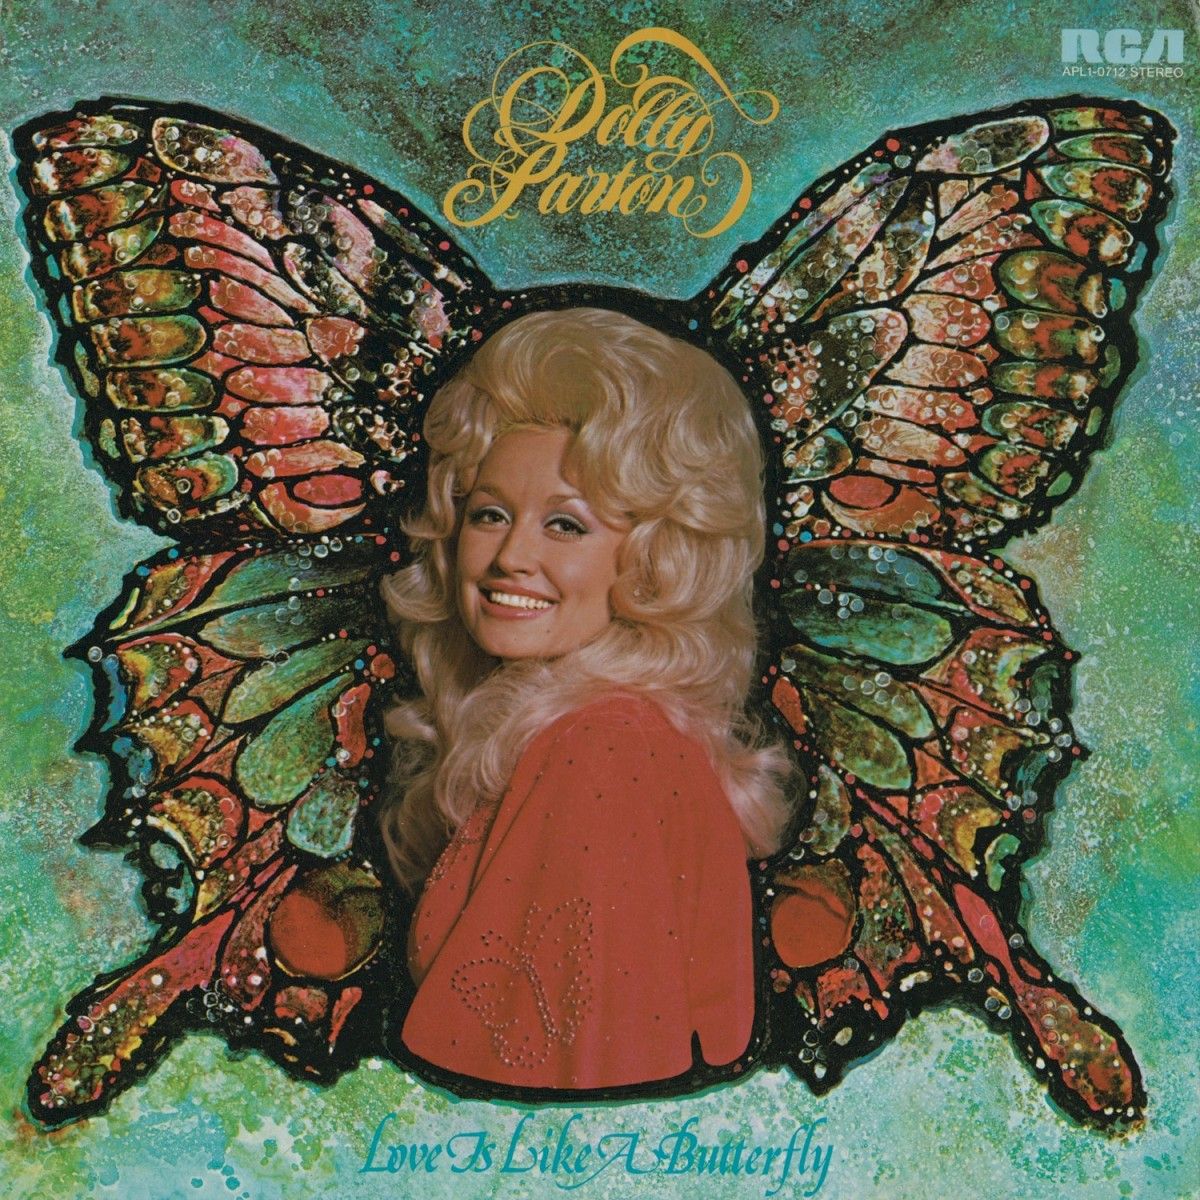 Dolly Parton - Love Is Like A Butterfly Album Cover